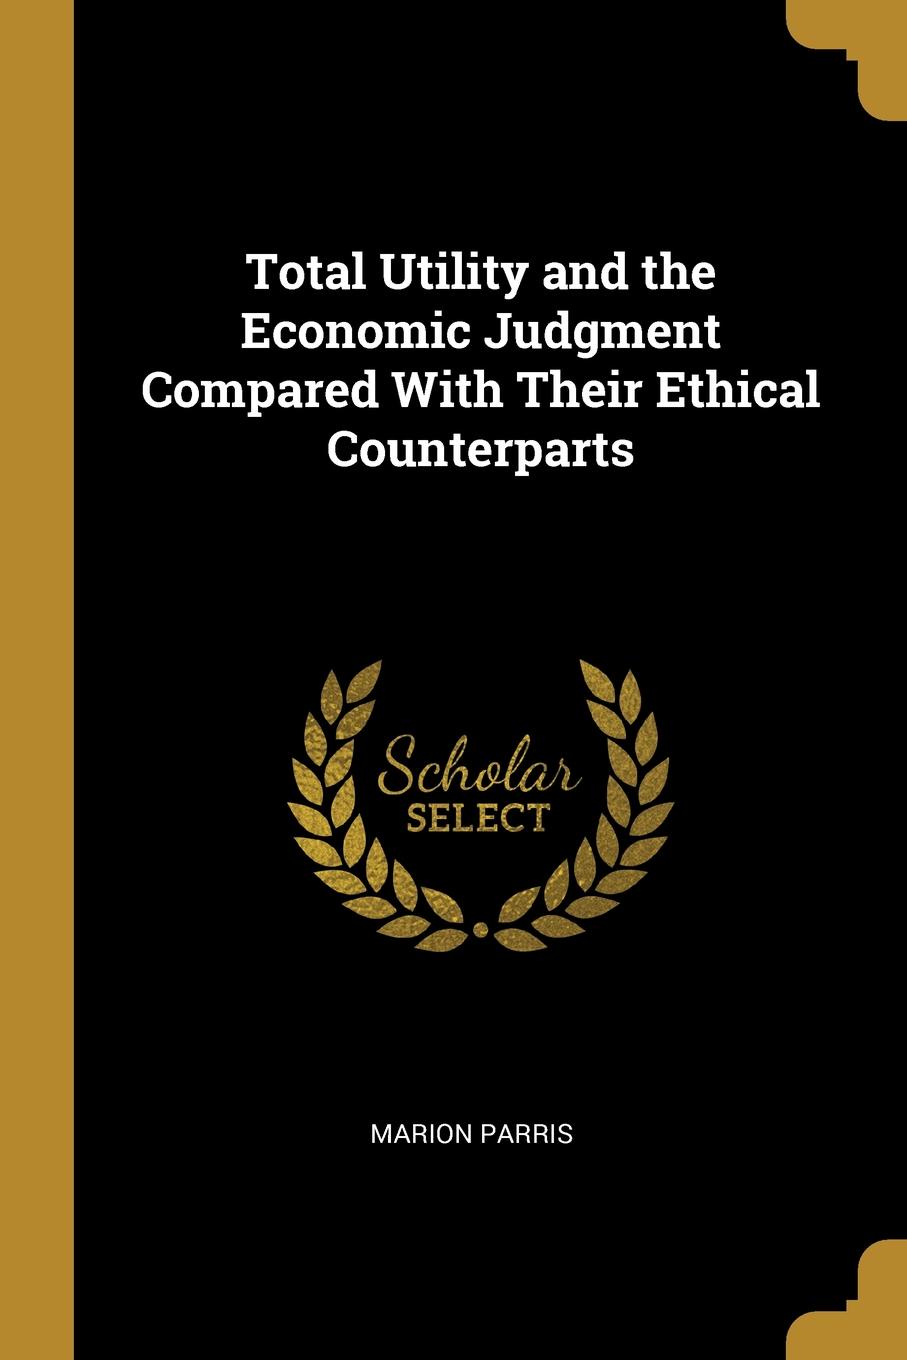 Total Utility and the Economic Judgment Compared With Their Ethical Counterparts